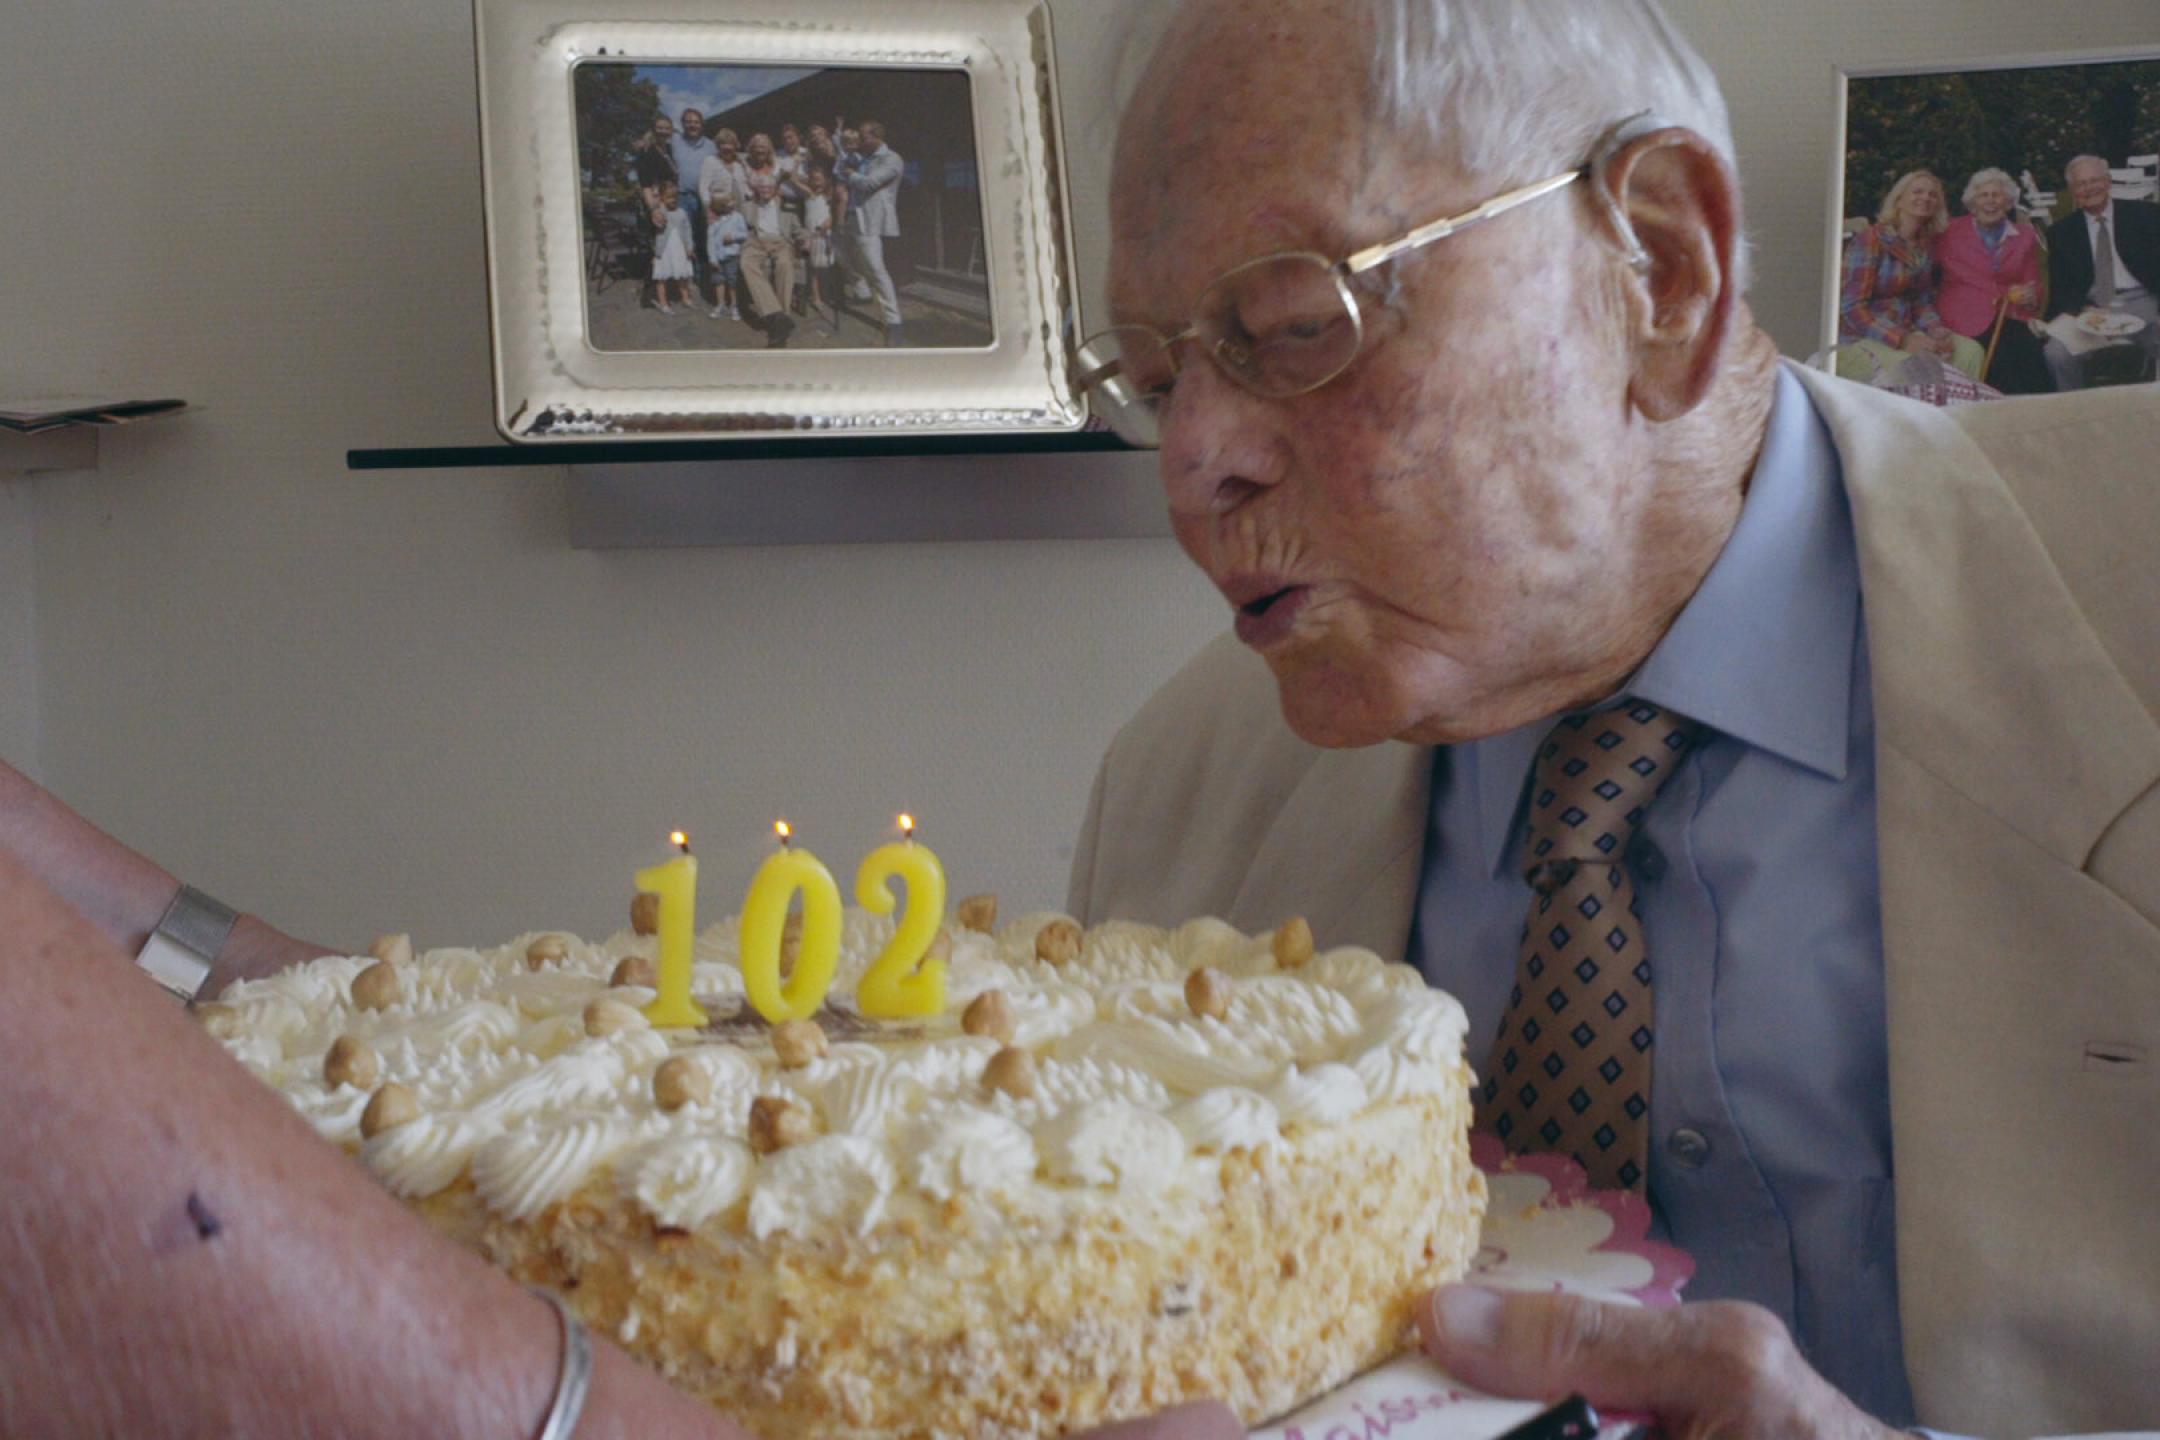 An older man blows out the candles on a huge birthday cake made of cream. There are three candles with the numbers 1, 0 and 2.